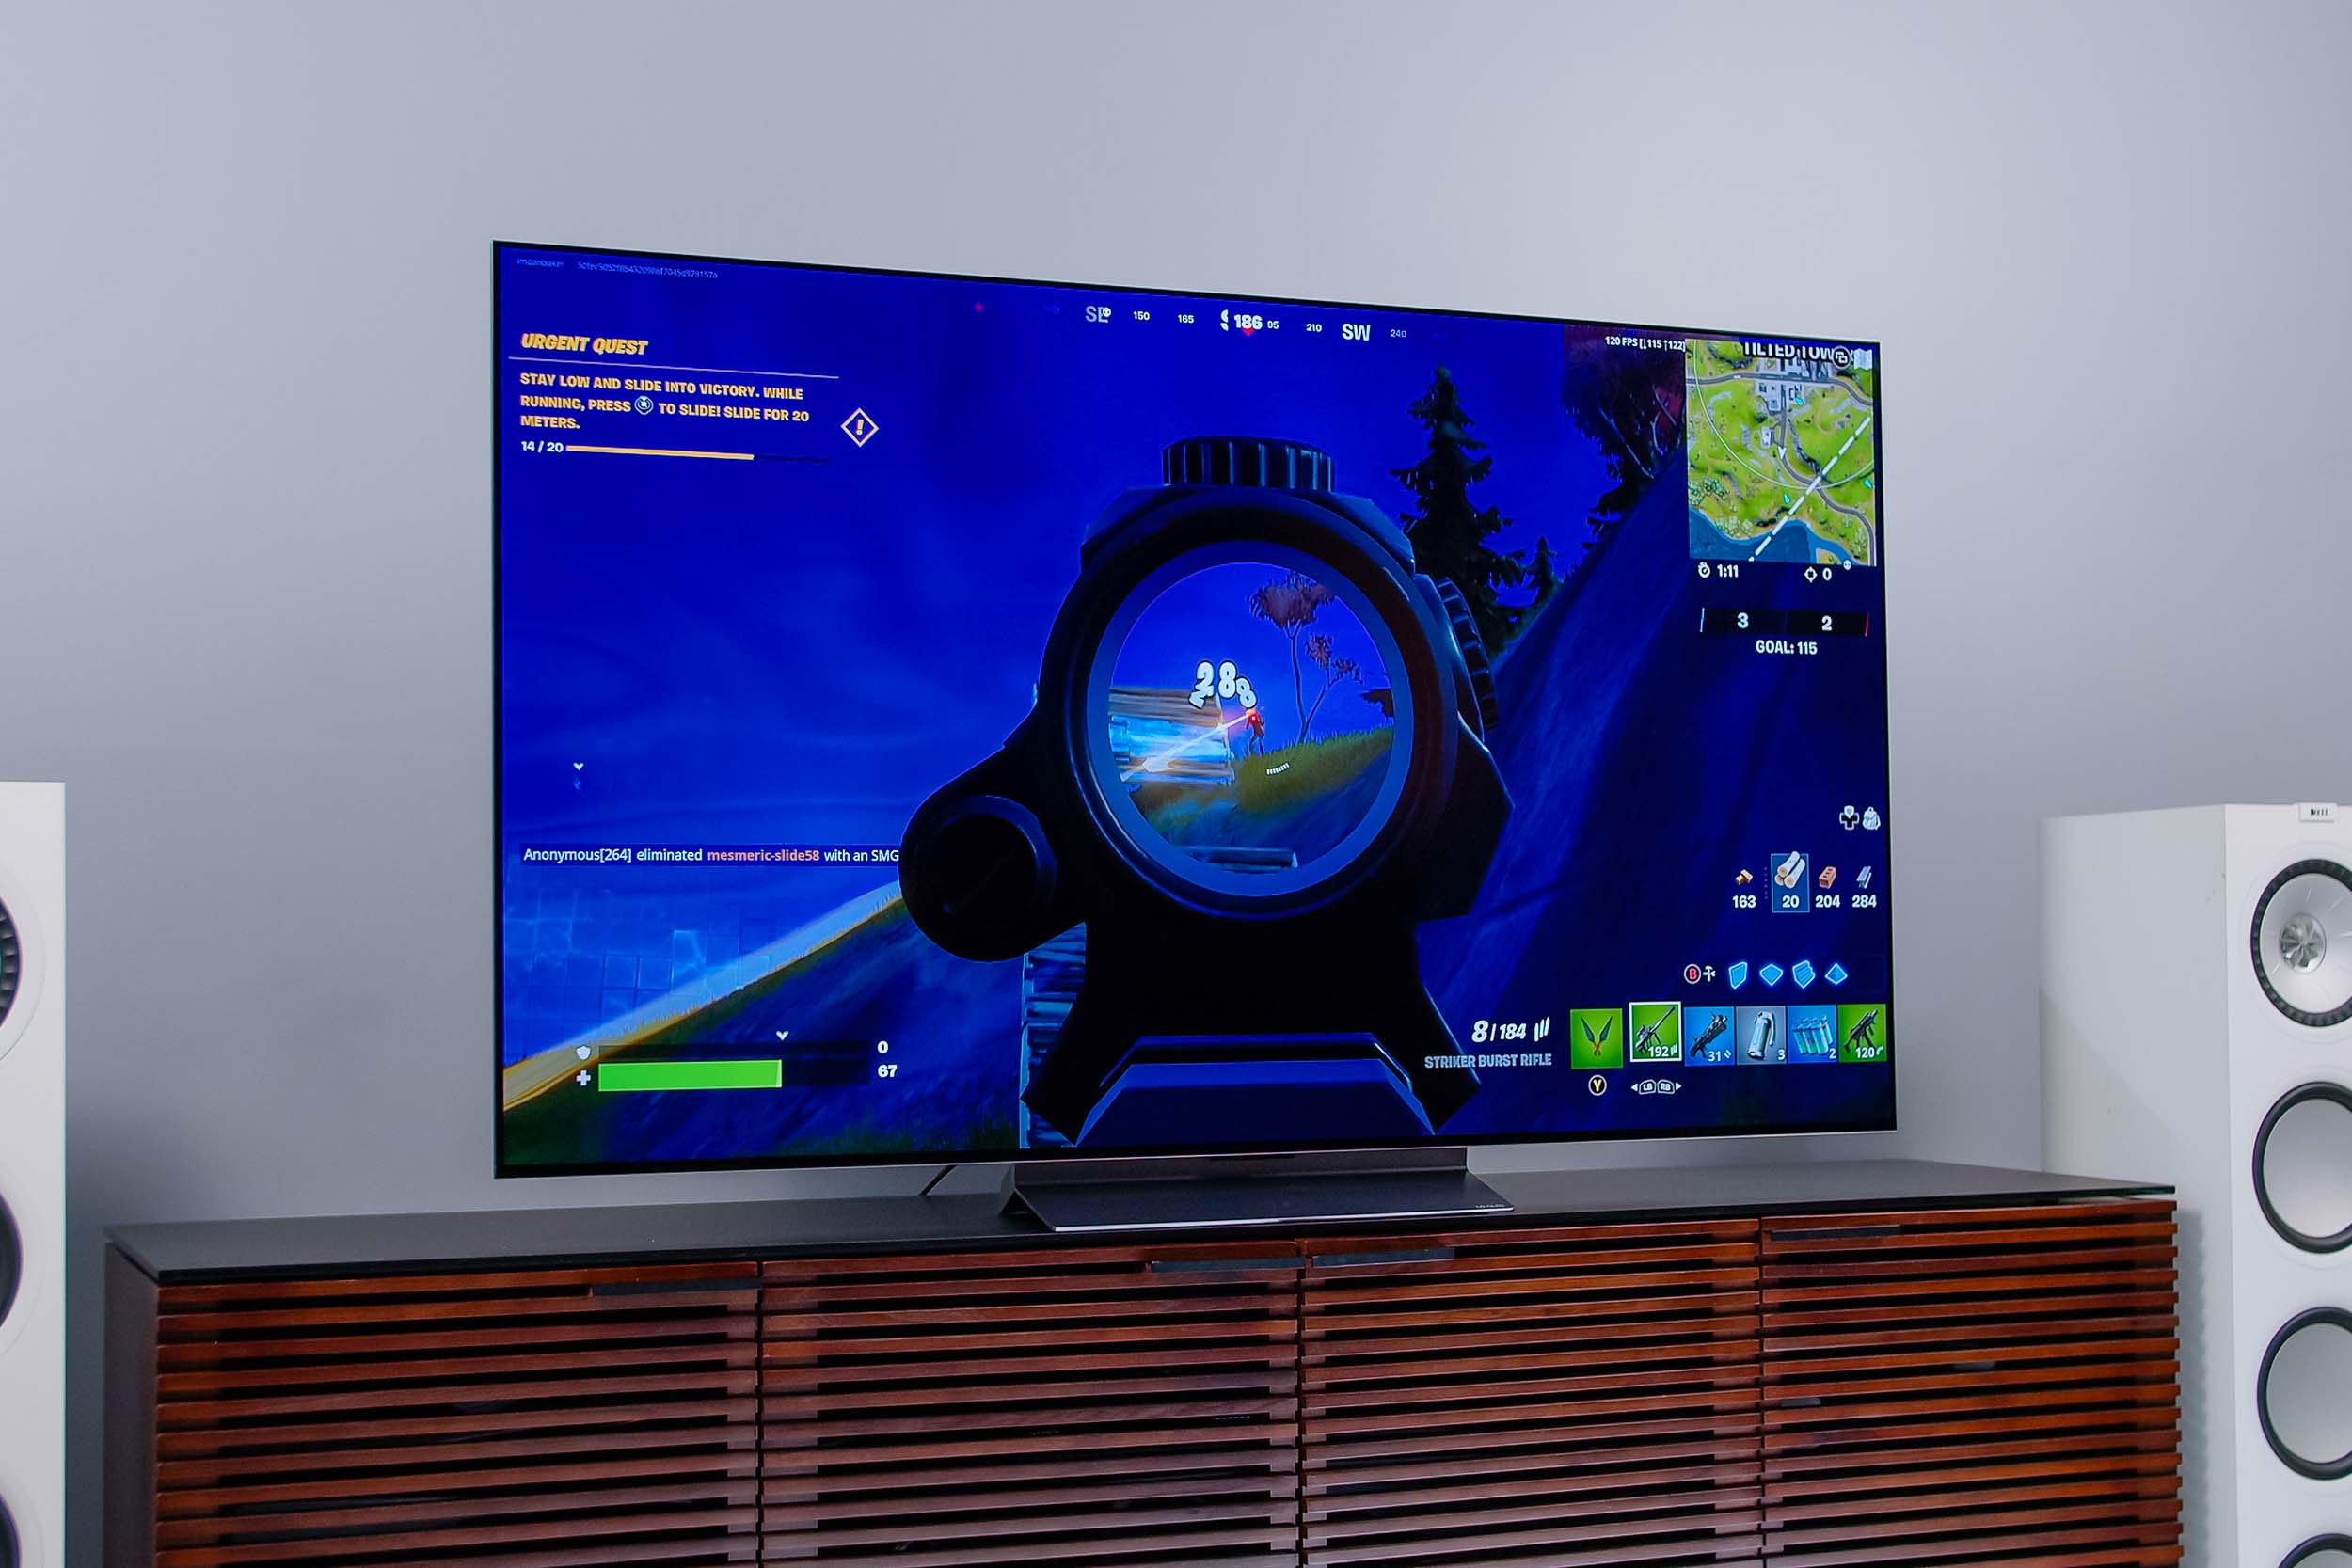 Fornite gameplay on the LG C2 OLED TV.